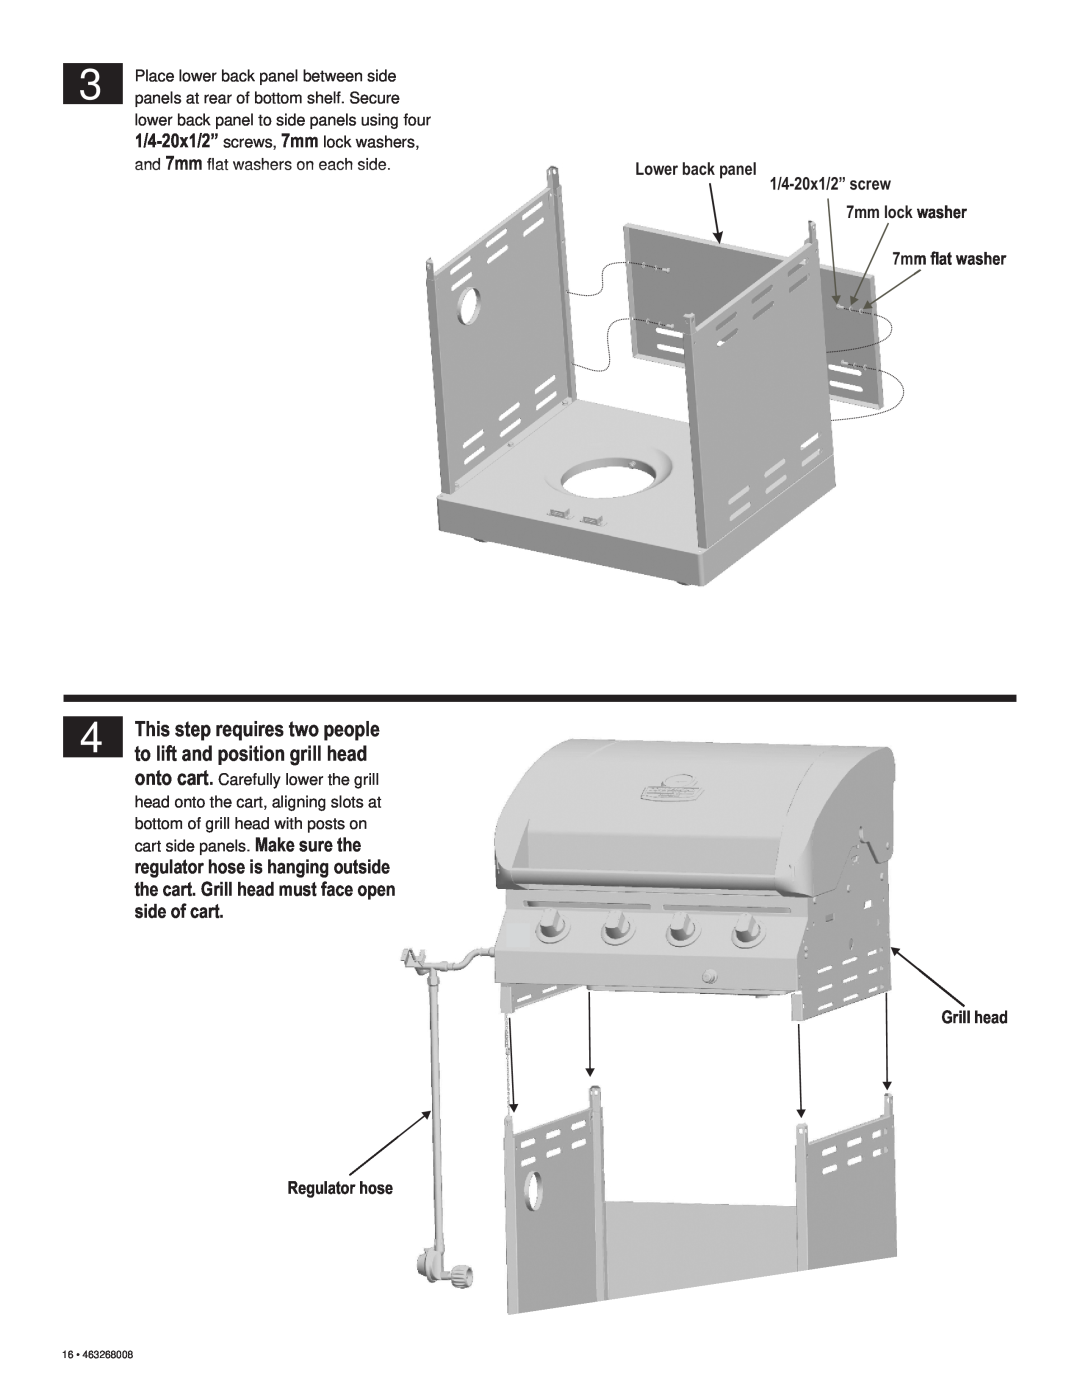 Char-Broil 463268008 manual This step requires two people to lift and position grill head, Grill head Regulator hose 